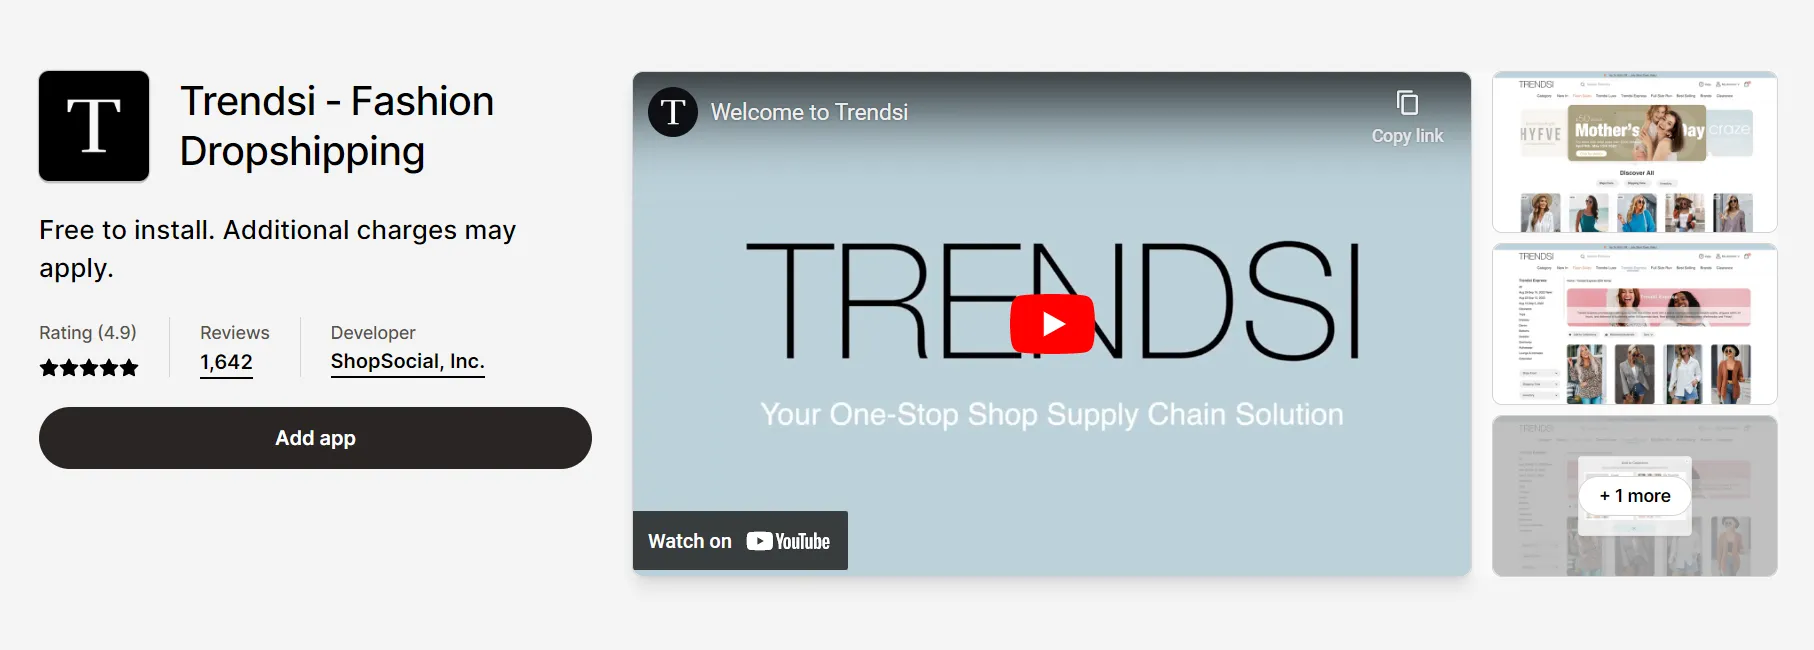 Trendsi Shopify app for dropshipping